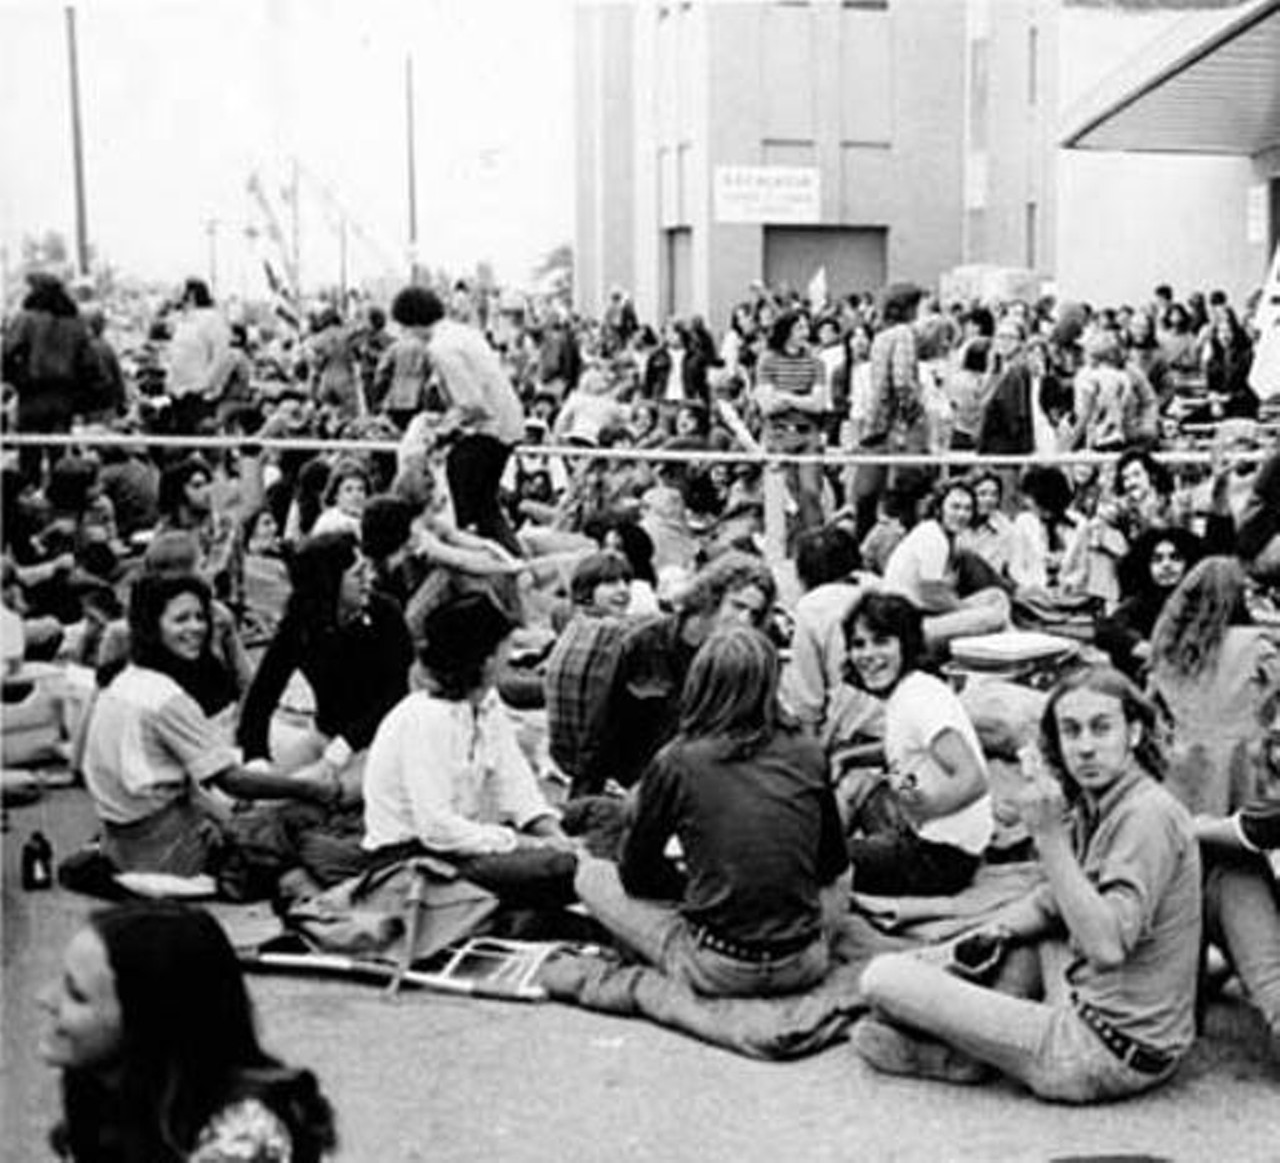 Campers waiting out for the World Series of Rock concert. 1975